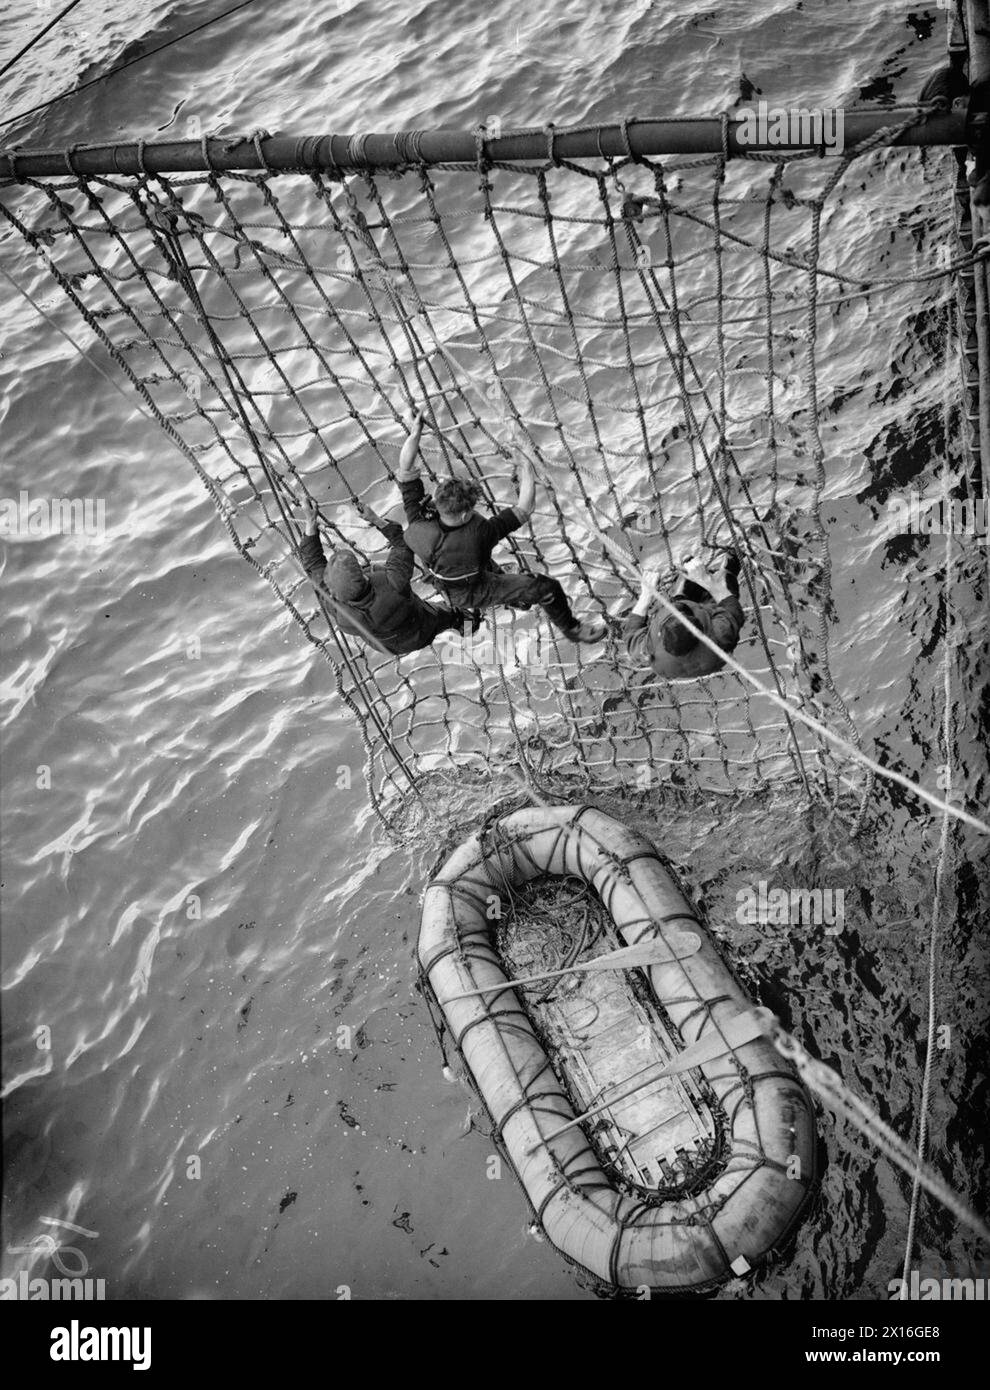 THE ROYAL NAVY DURING THE SECOND WORLD WAR - Practice in progress in the Clyde, off Greenock with the SS GOTHLAND, one of the fleet auxiliary rescue ships which sailed with convoys when the U-Boat war was at its height. 'Survivors' scrambling up the nets from their raft. The ship has a boom out each side for this purpose Stock Photo